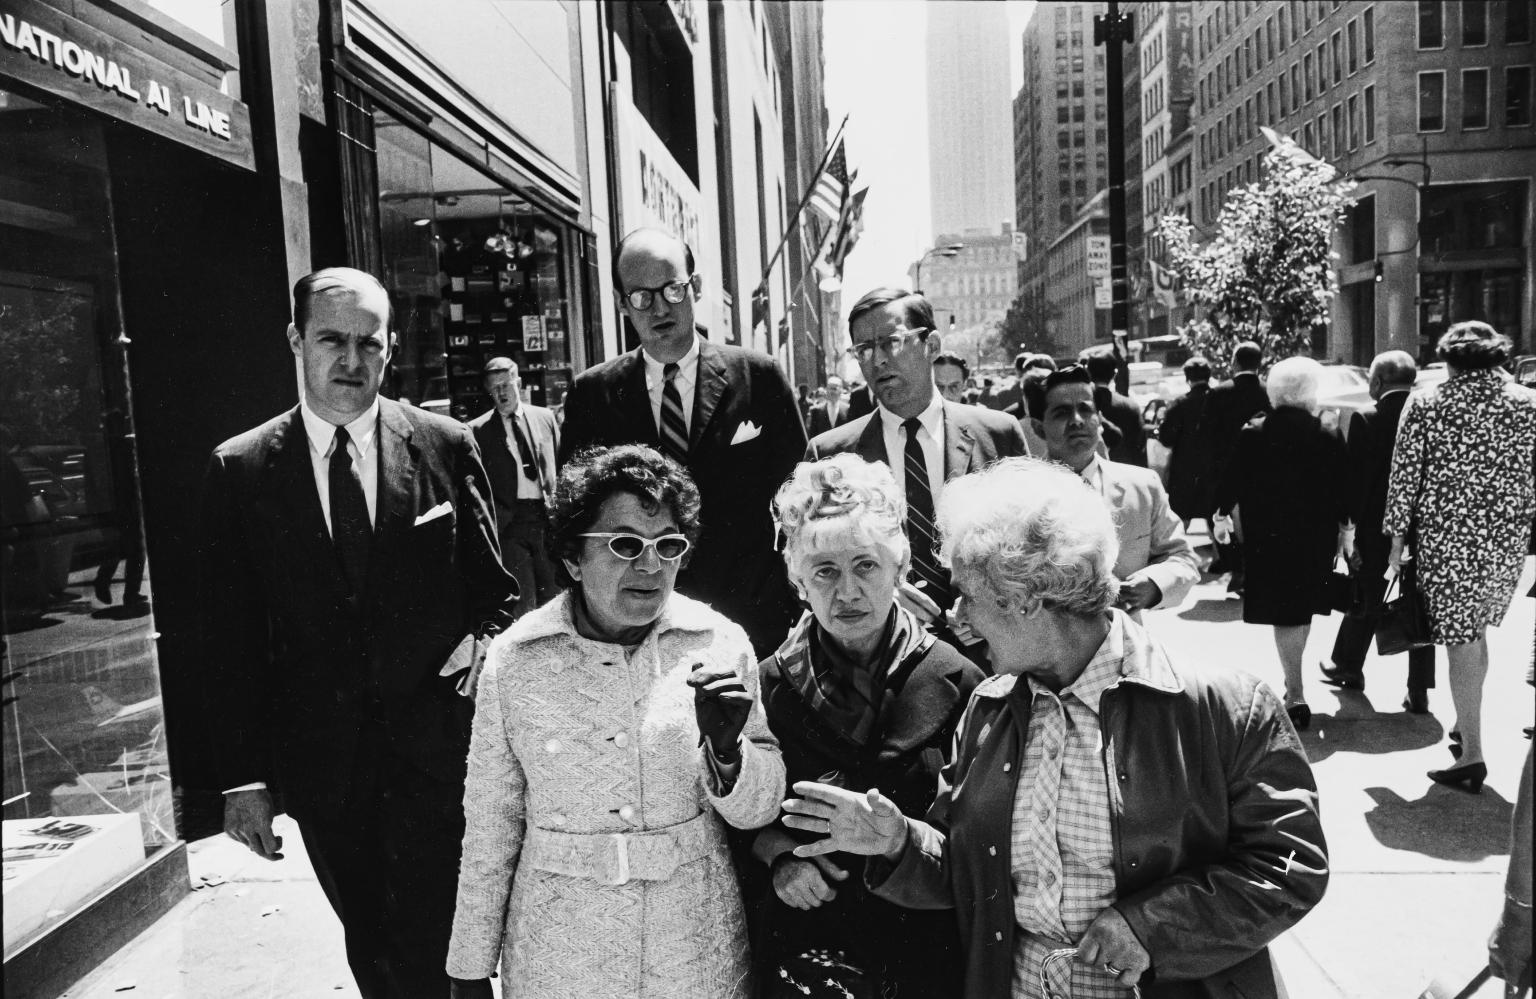 Photograph of three elderly women walking and talking on busy city sidewalk with men in suits behind them.